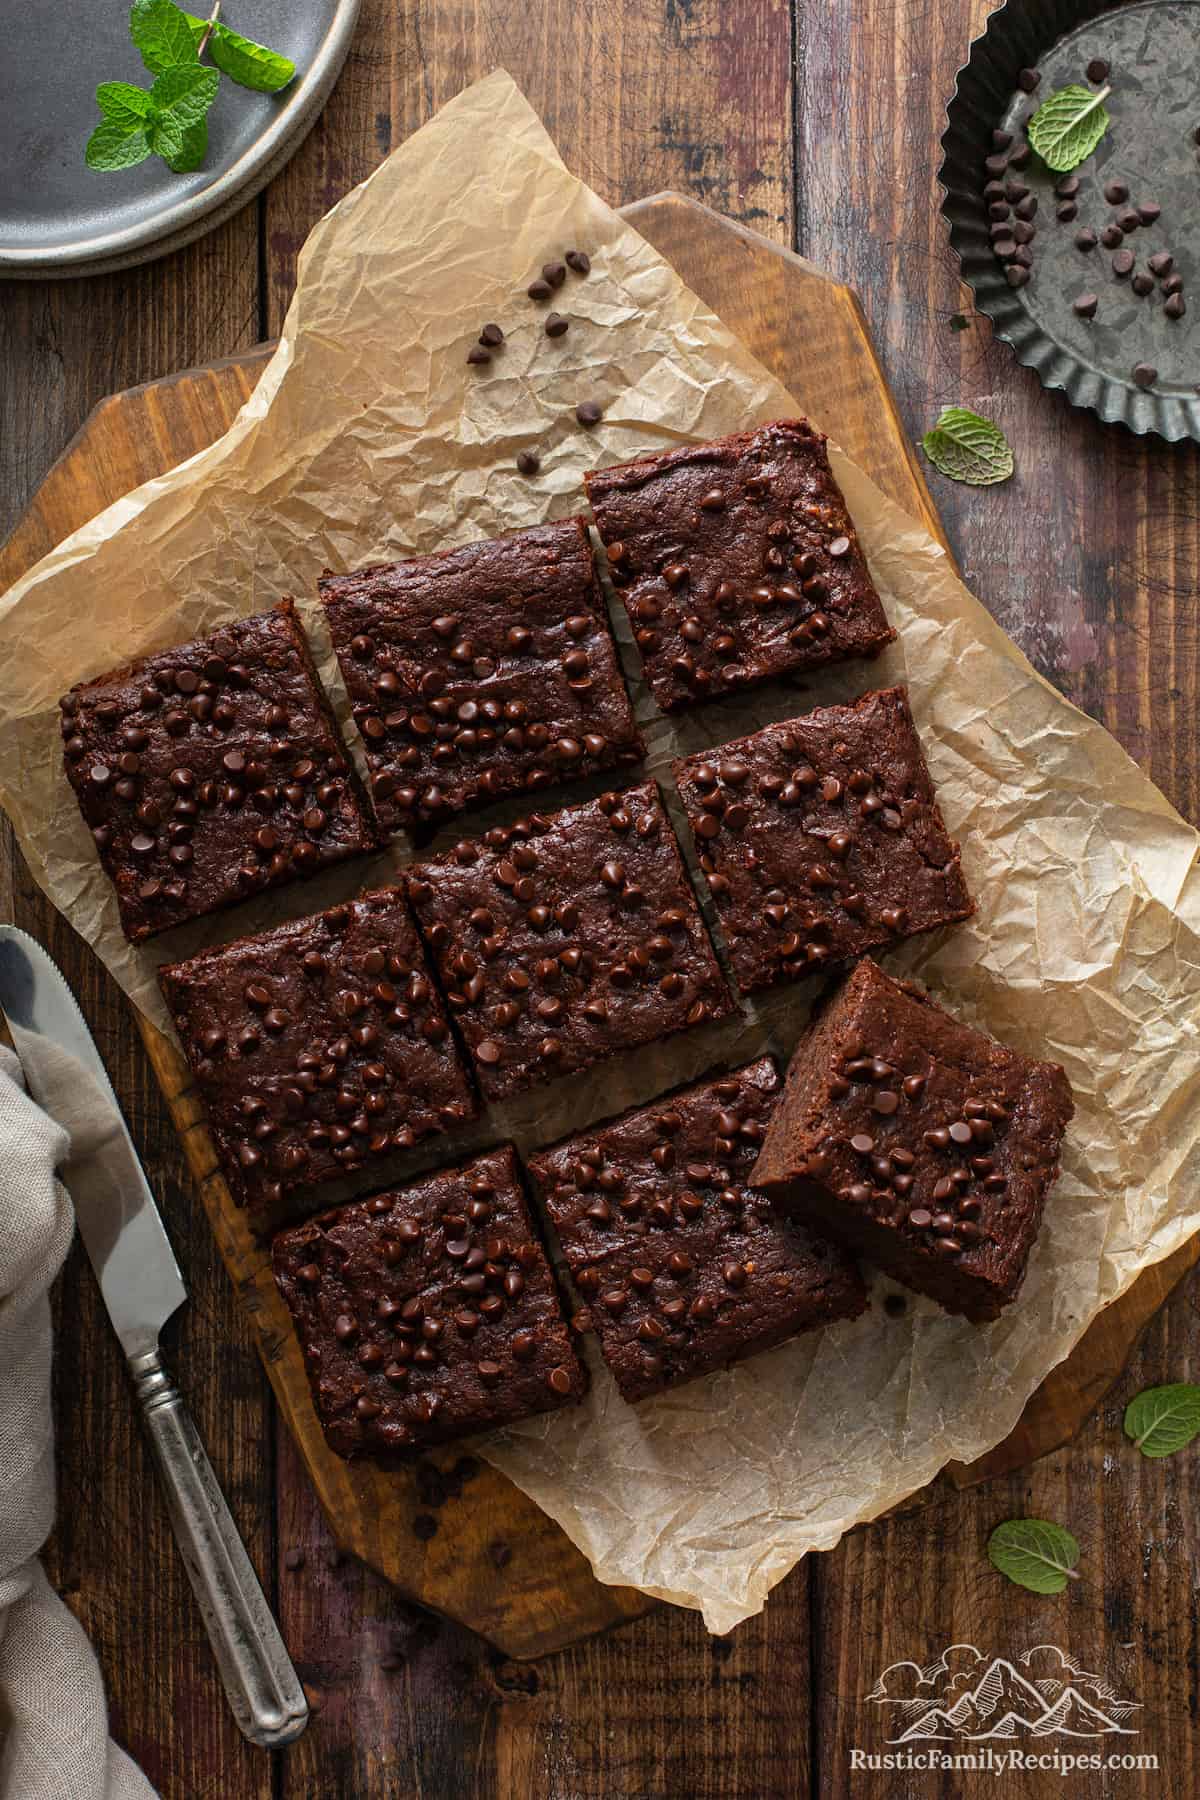 Sliced Vegan Brownies on parchment paper